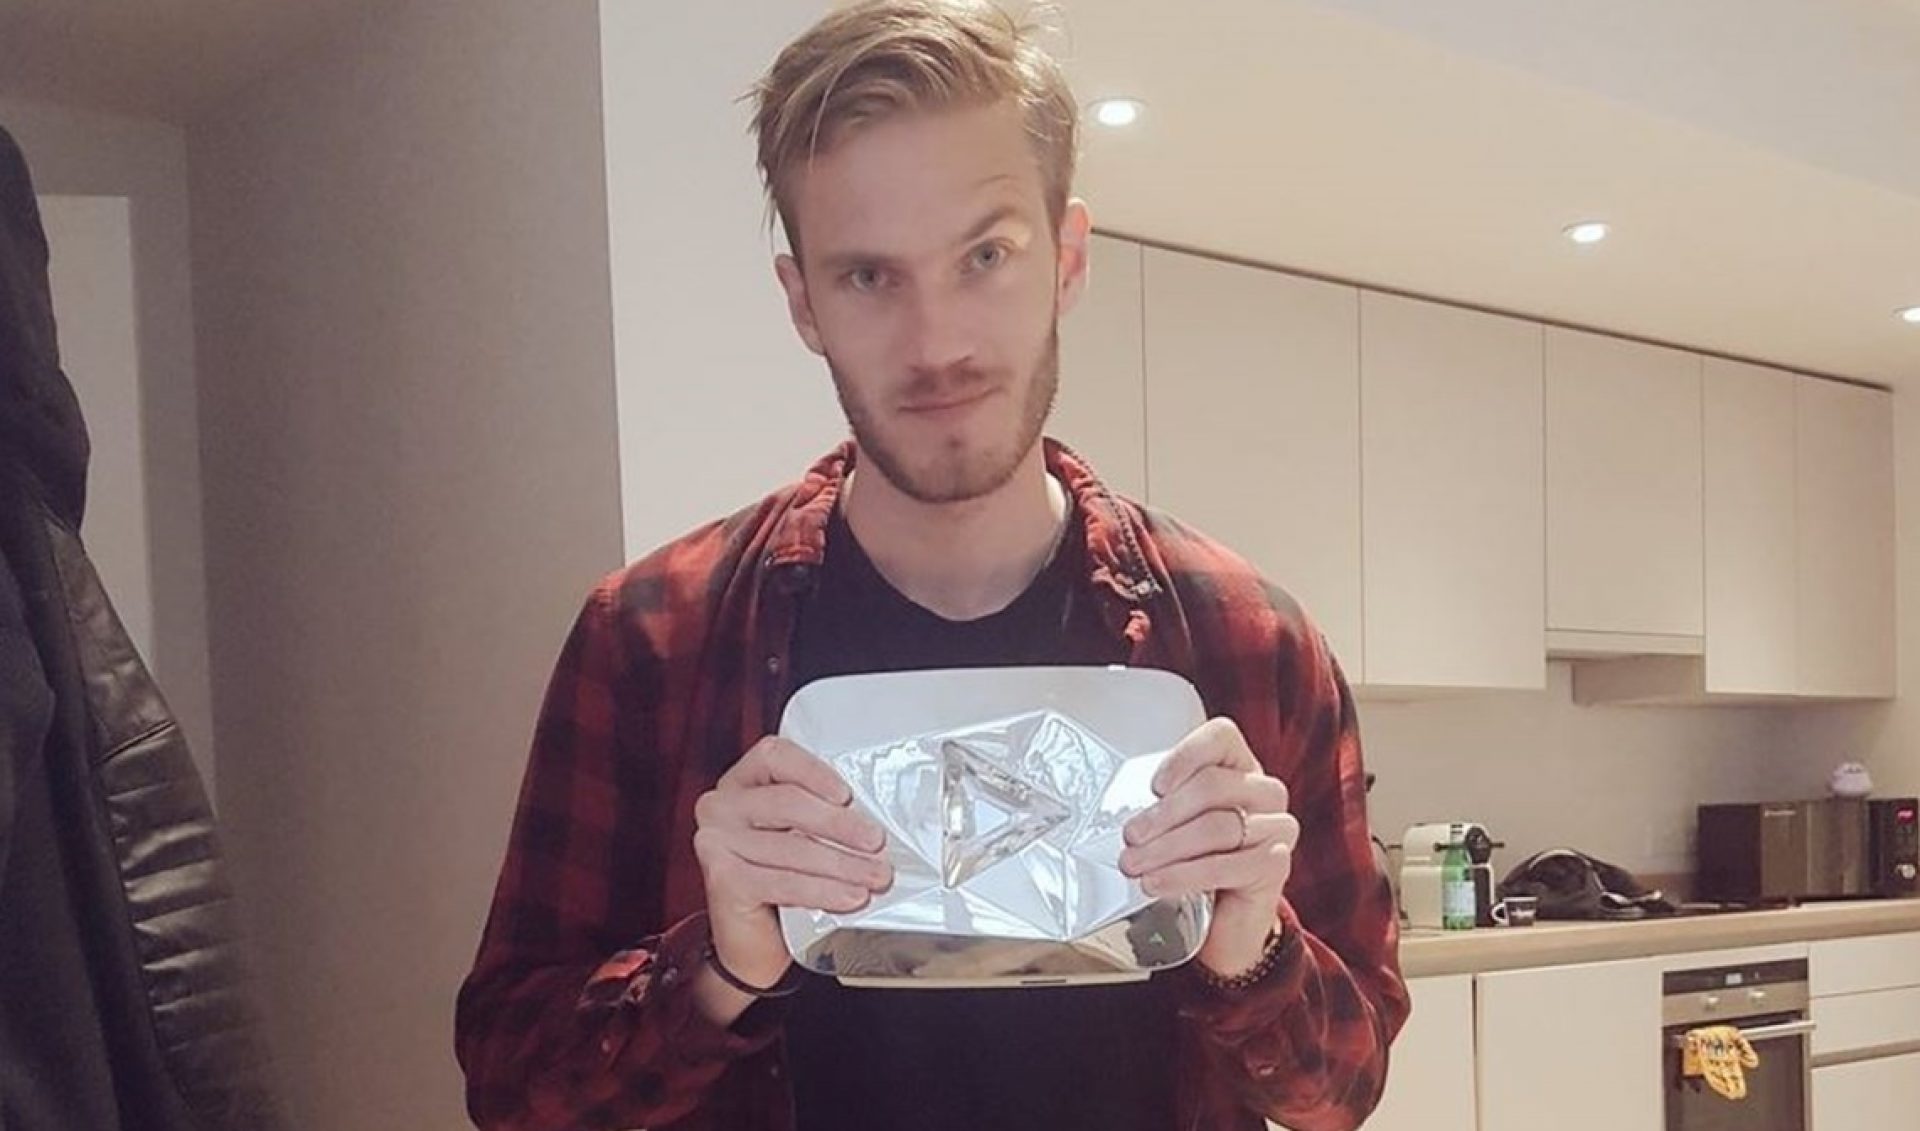 Rejoice! The Saga Of PewDiePie’s Diamond Play Button Has Finally Come To An End